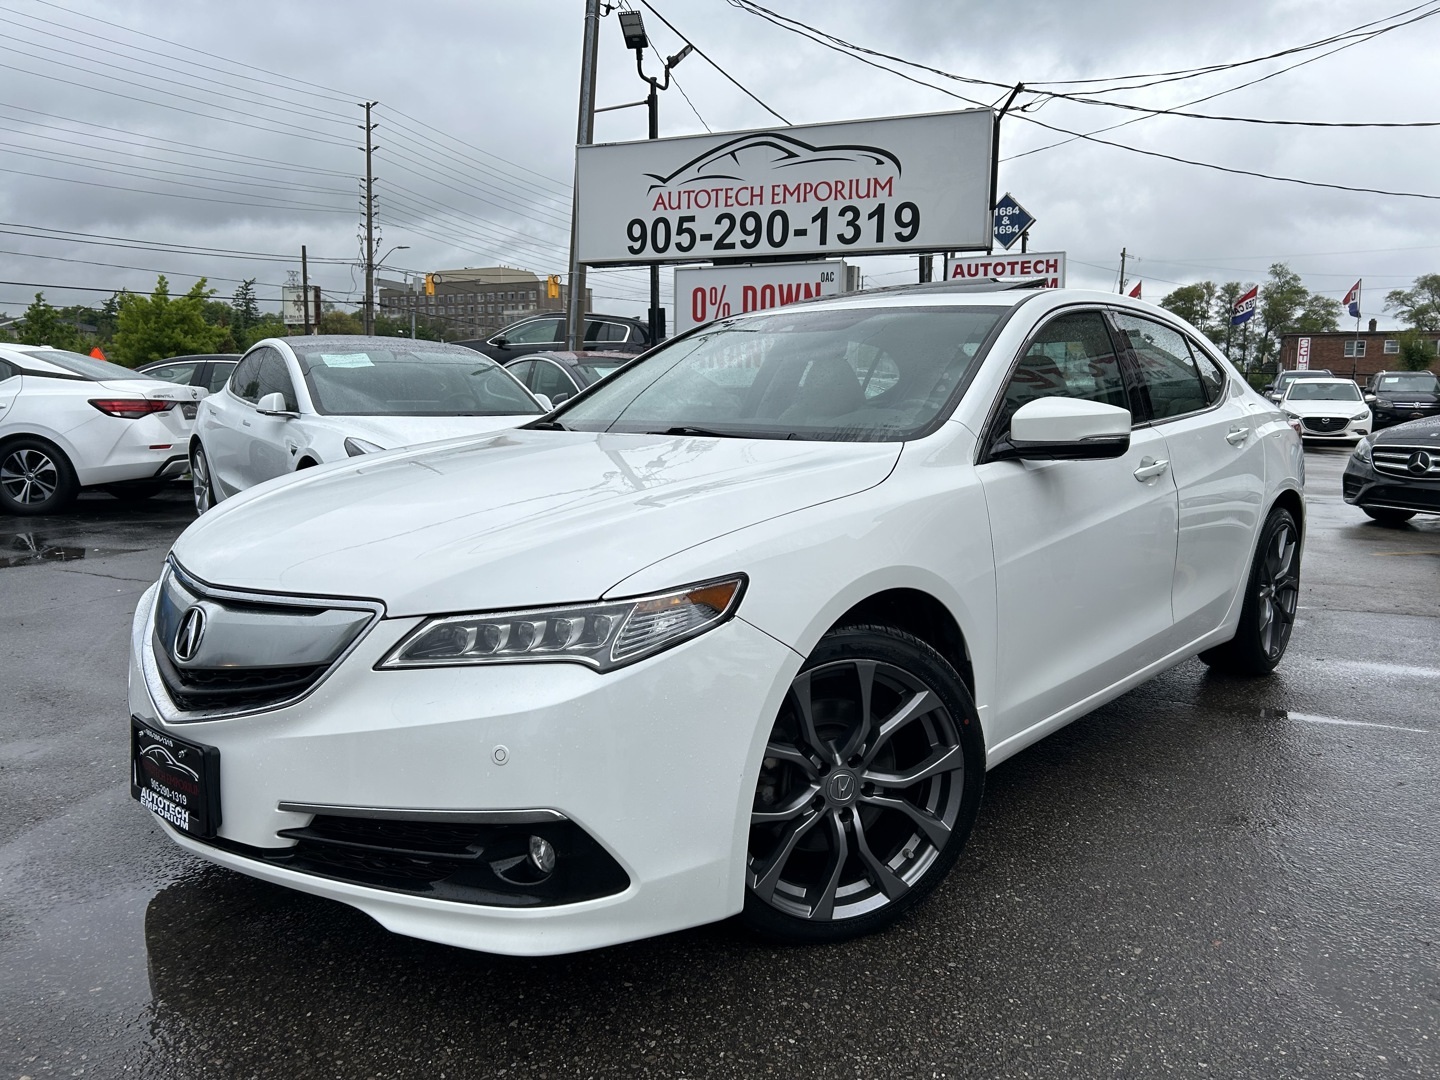 2017 Acura TLX ELITE Pearl White  / Leather / Ventilated Seats / 